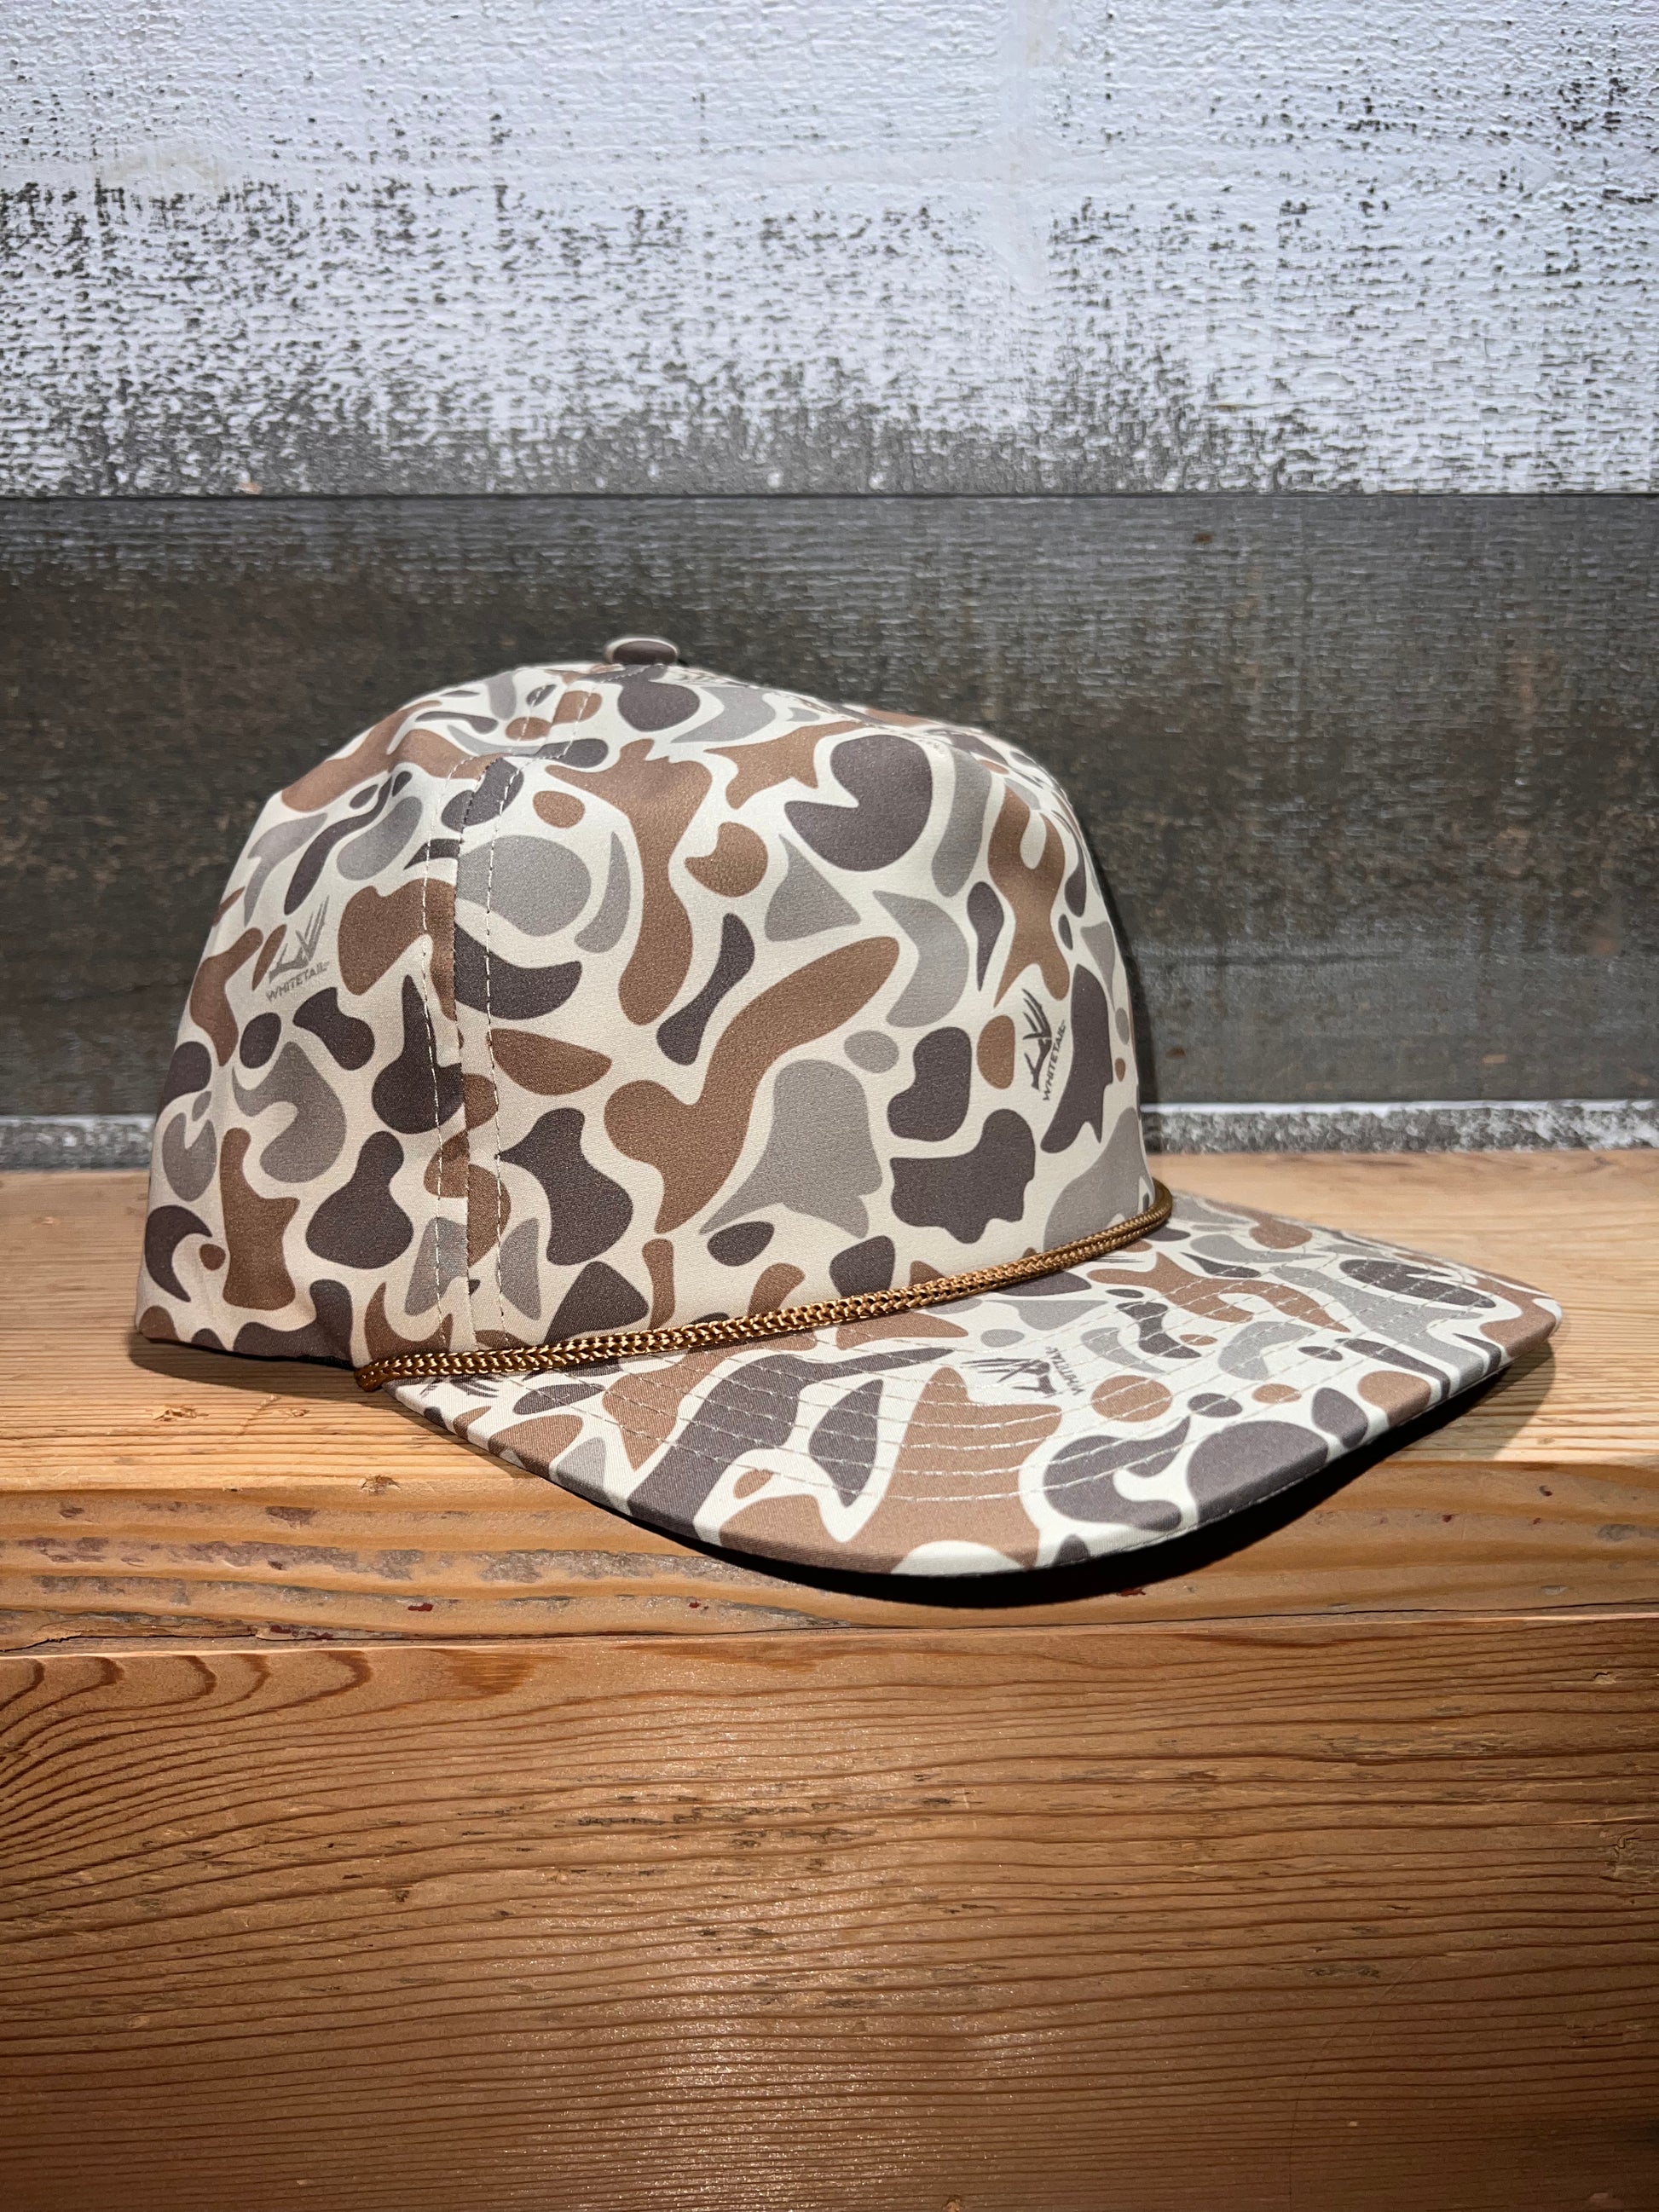 Whitetail Deer Patch Camo Rope Hat – Panola Brand®